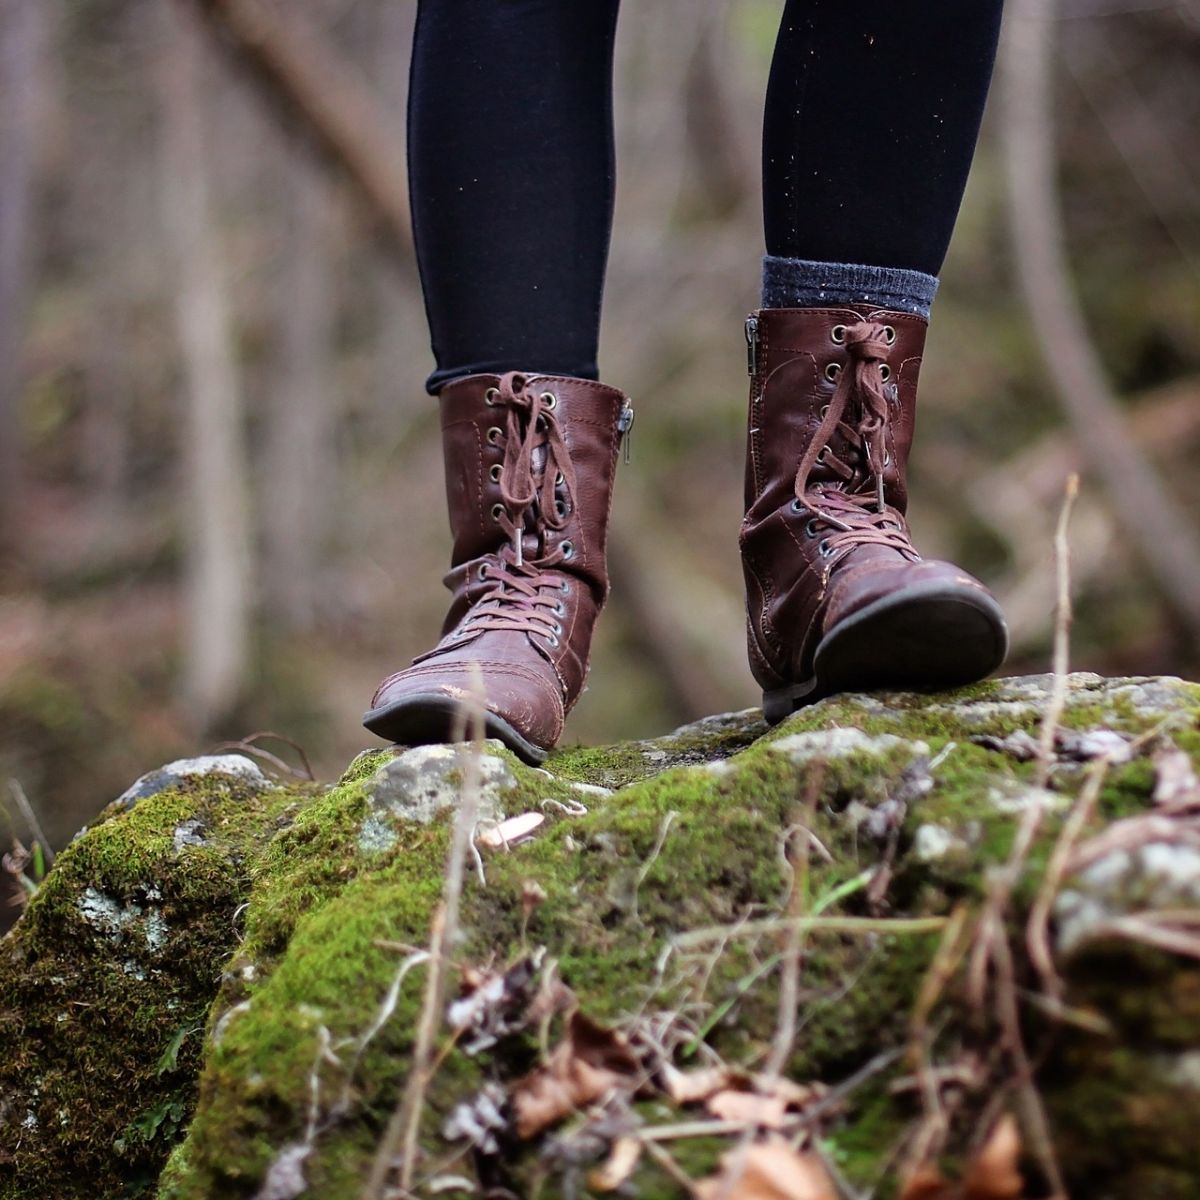 Close up of a woman's lower legs and hiking boots while she stands on a mossy rock in the forest